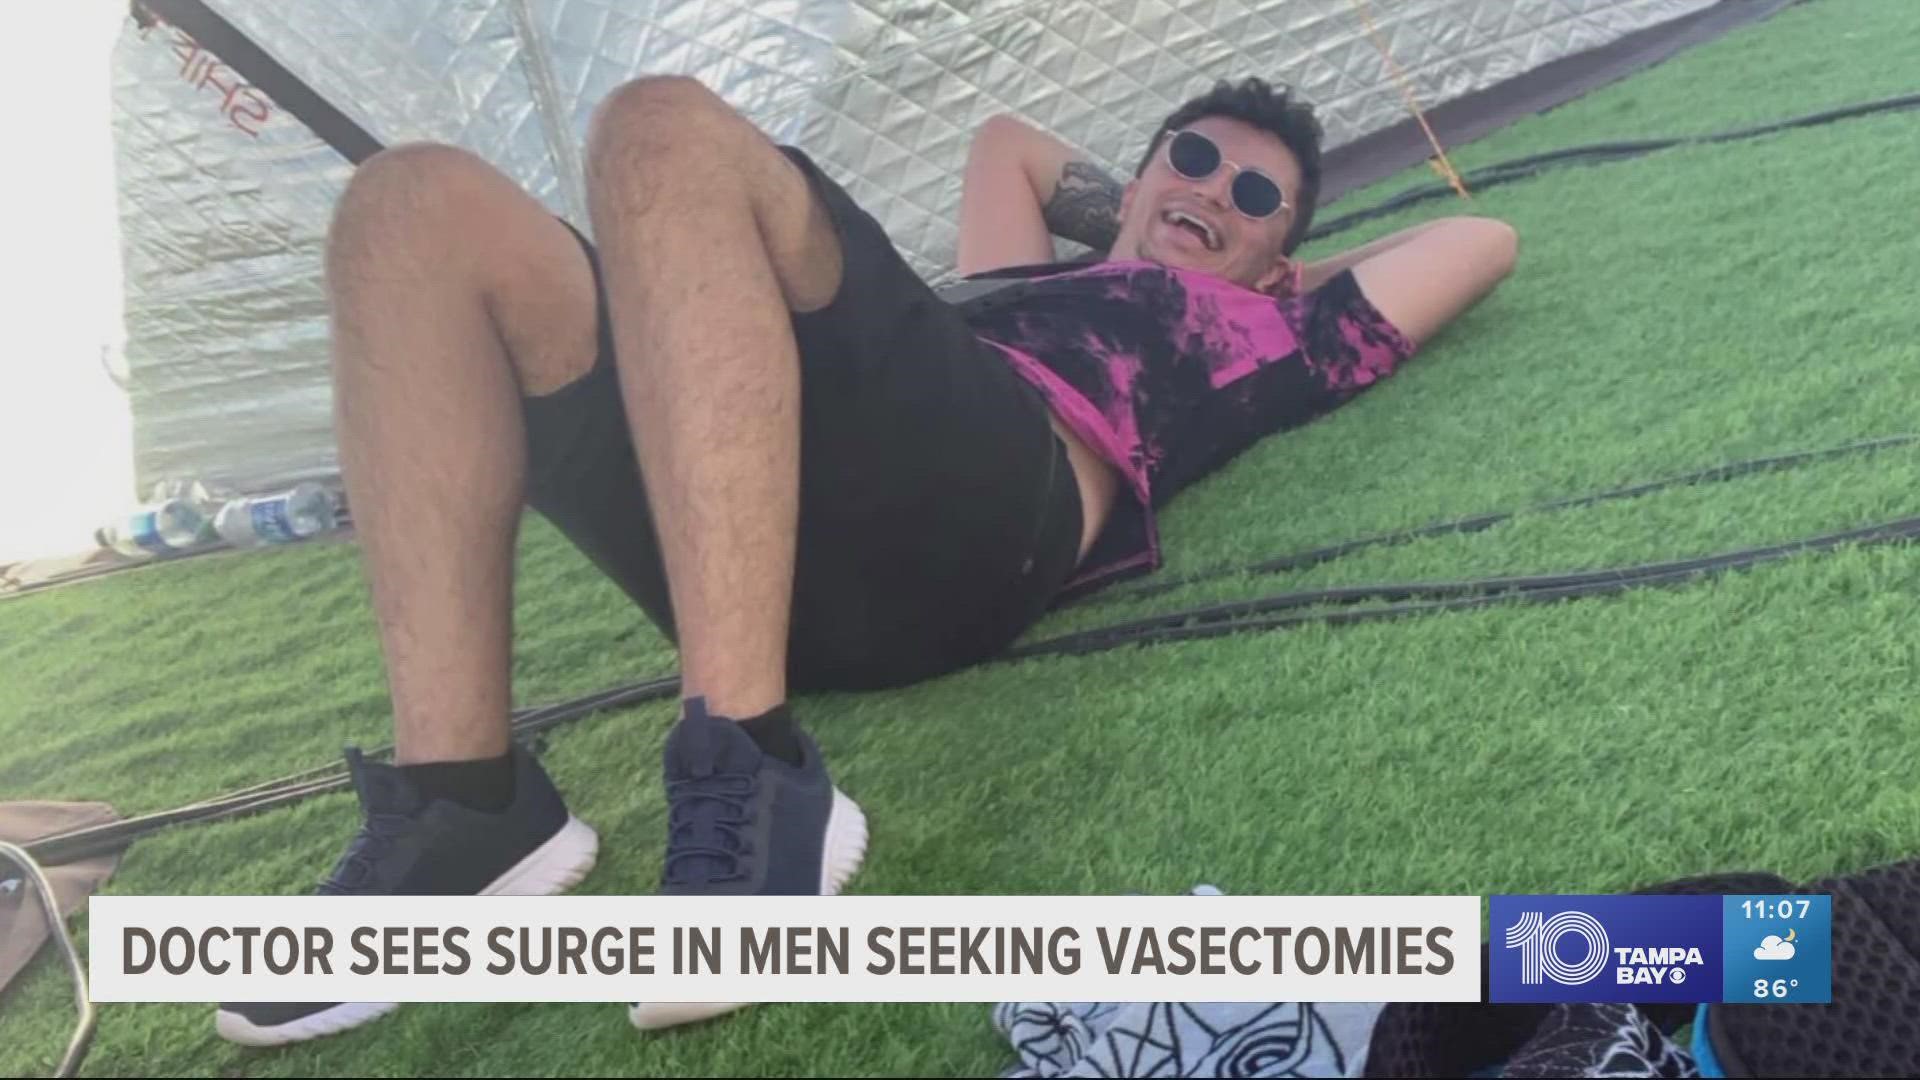 A Lutz-based urologist says the numbers of men who registered for a vasectomy tripled in the week after Roe v. Wade was overturned.